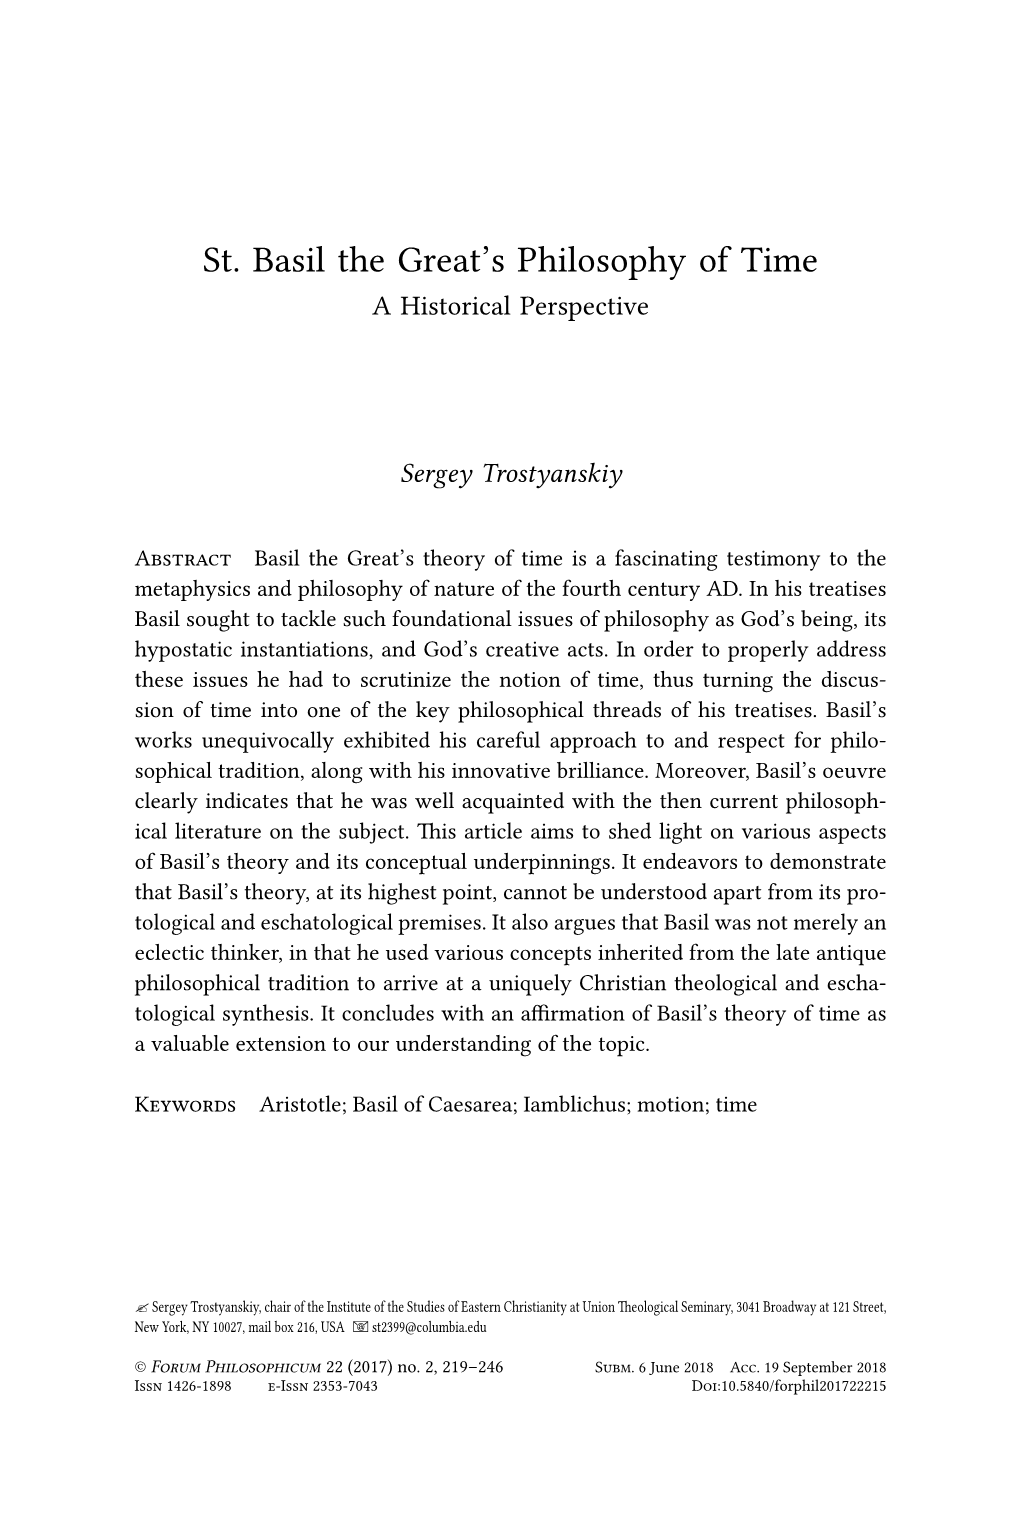 St. Basil the Great's Philosophy of Time